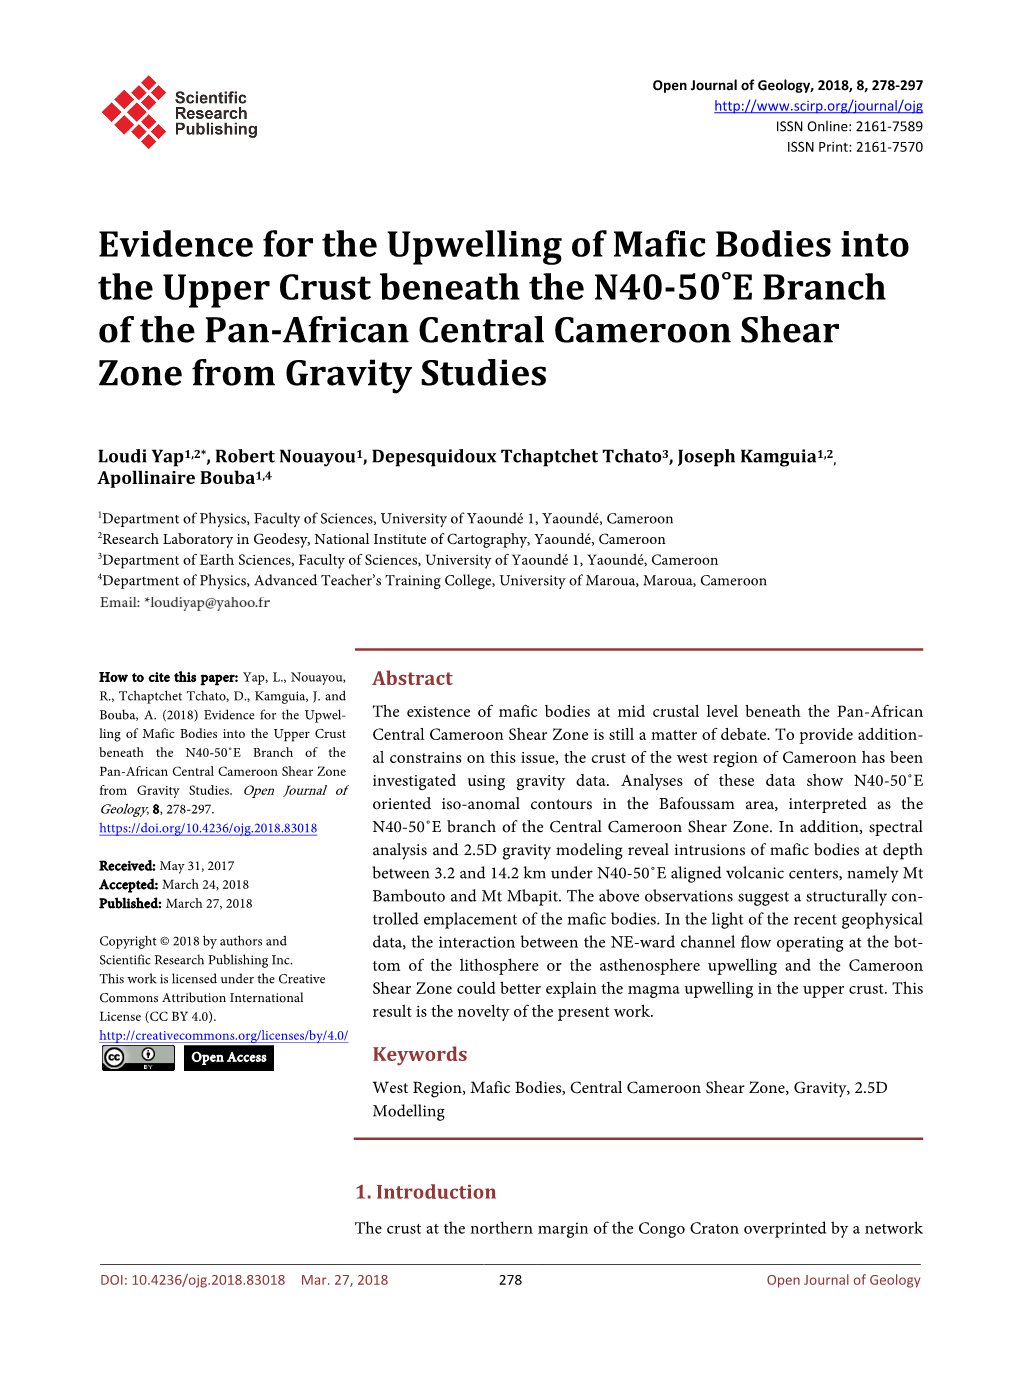 Evidence for the Upwelling of Mafic Bodies Into the Upper Crust Beneath the N40-50˚E Branch of the Pan-African Central Cameroon Shear Zone from Gravity Studies